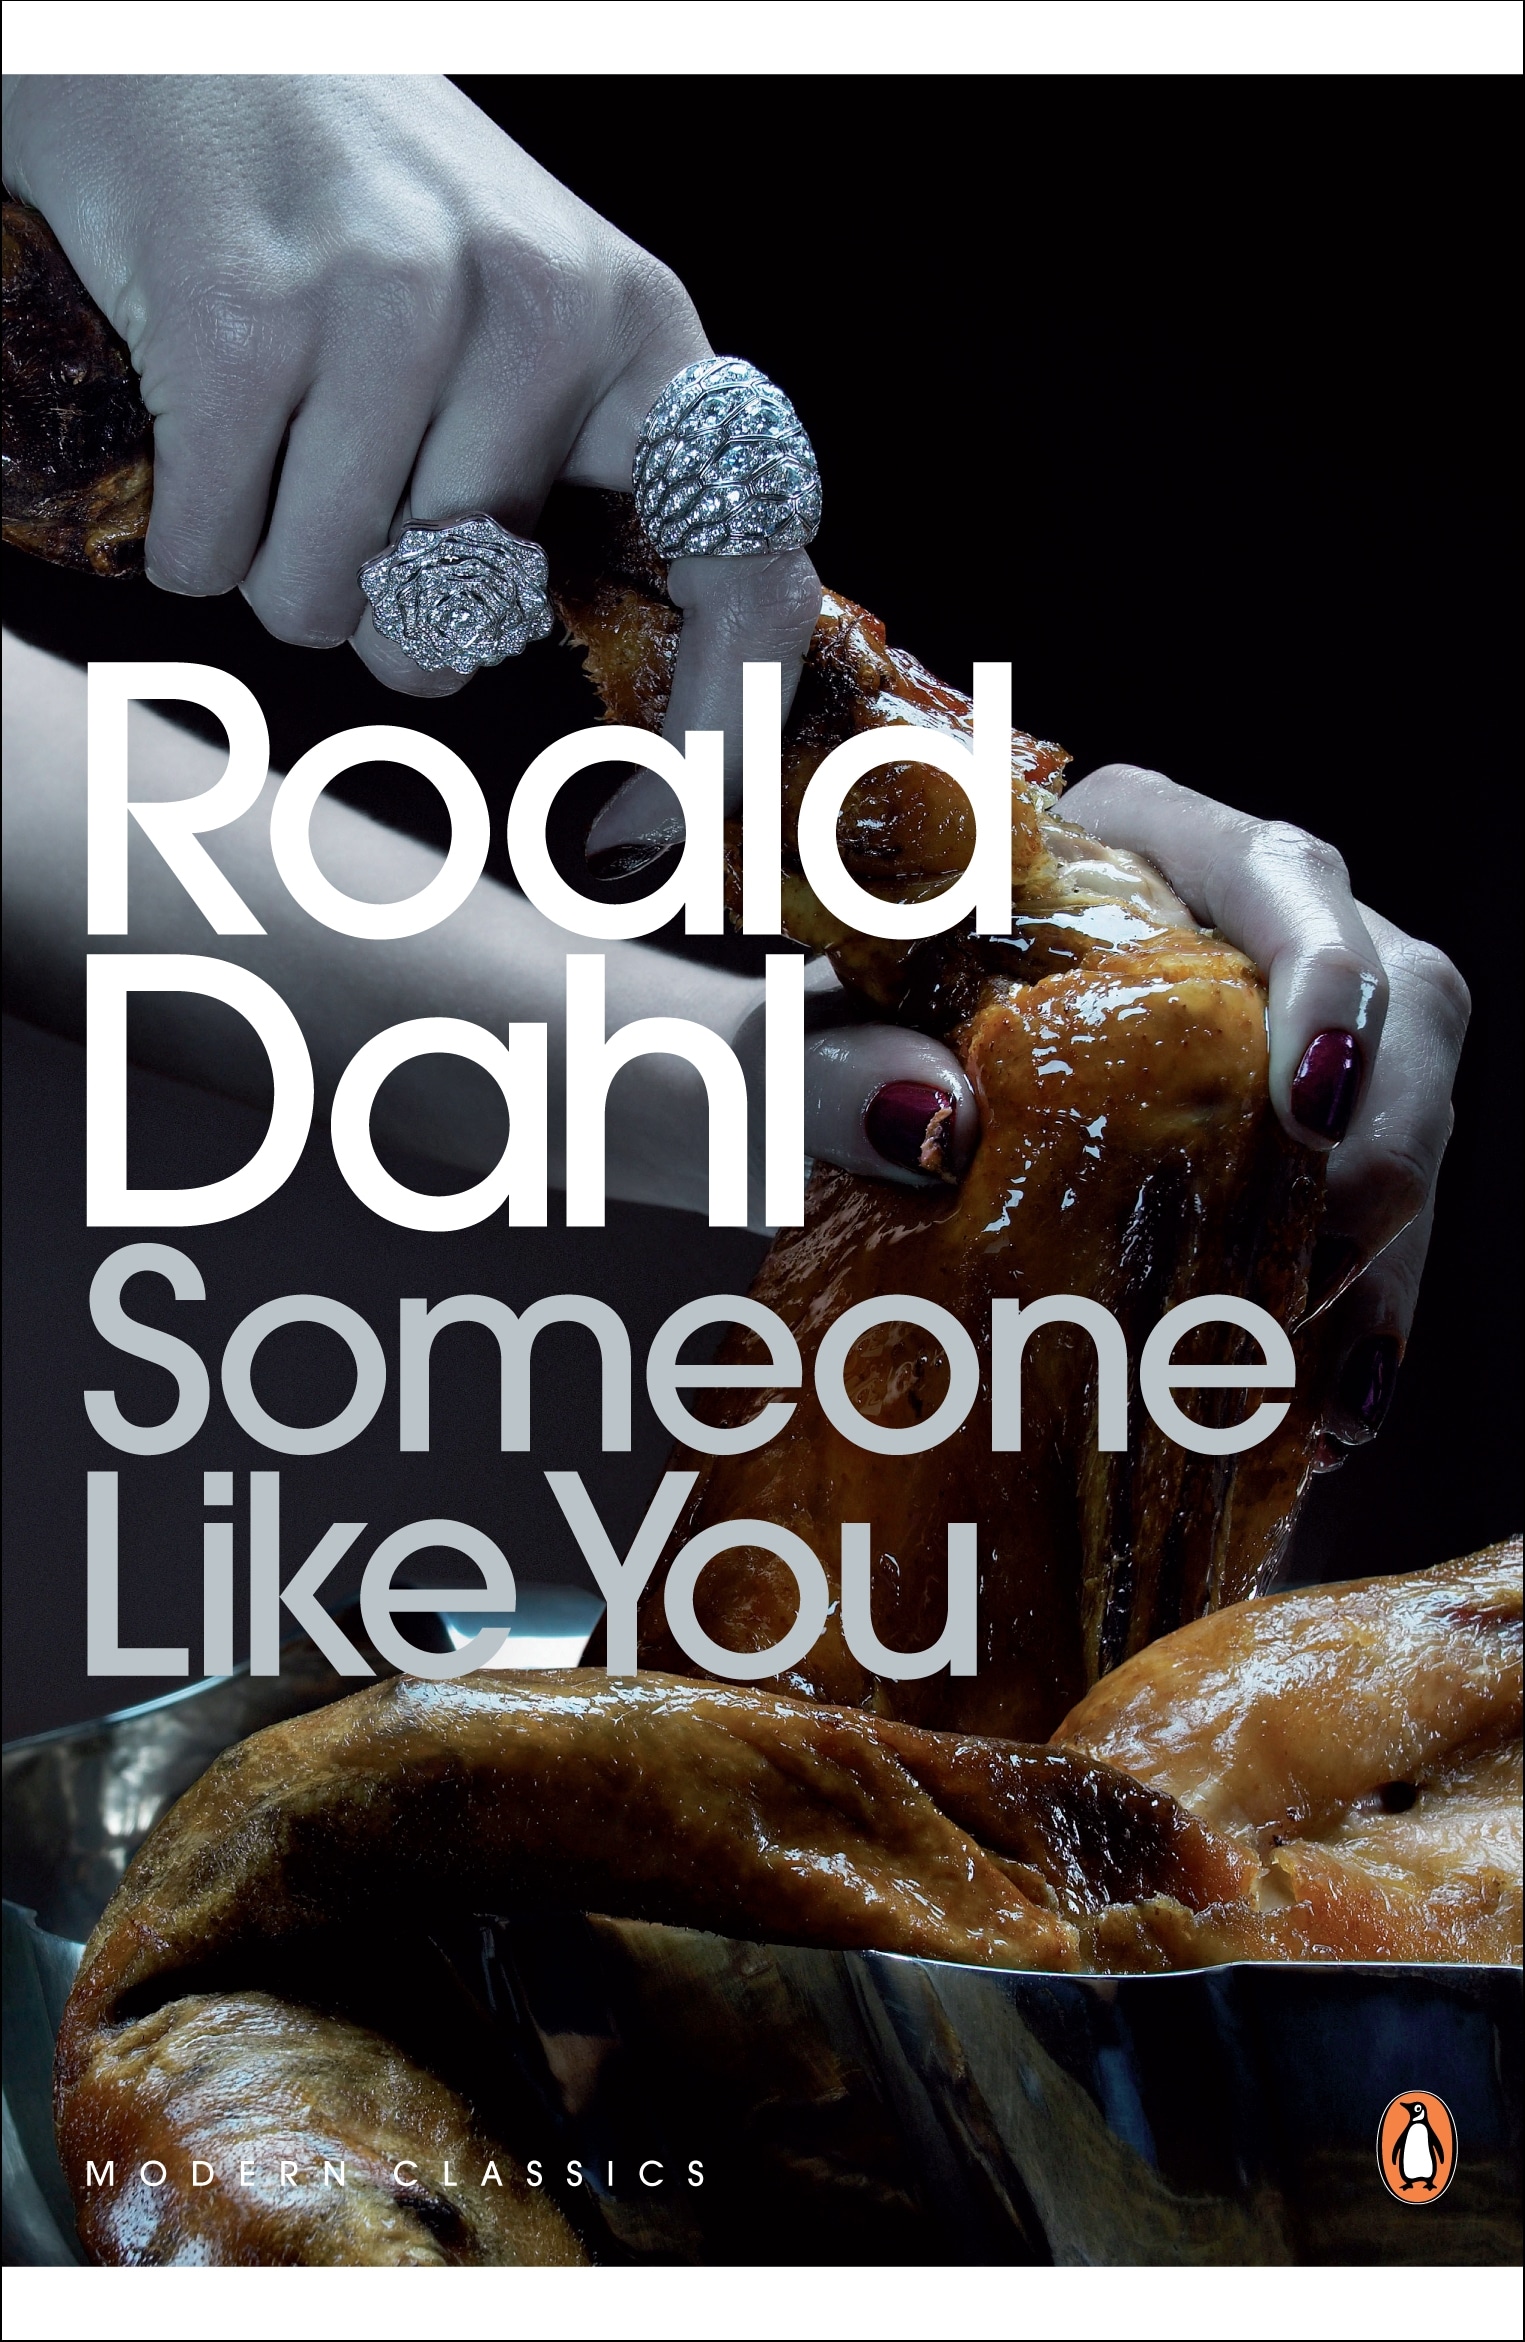 Book “Someone Like You” by Roald Dahl, Dom Joly — December 7, 2009